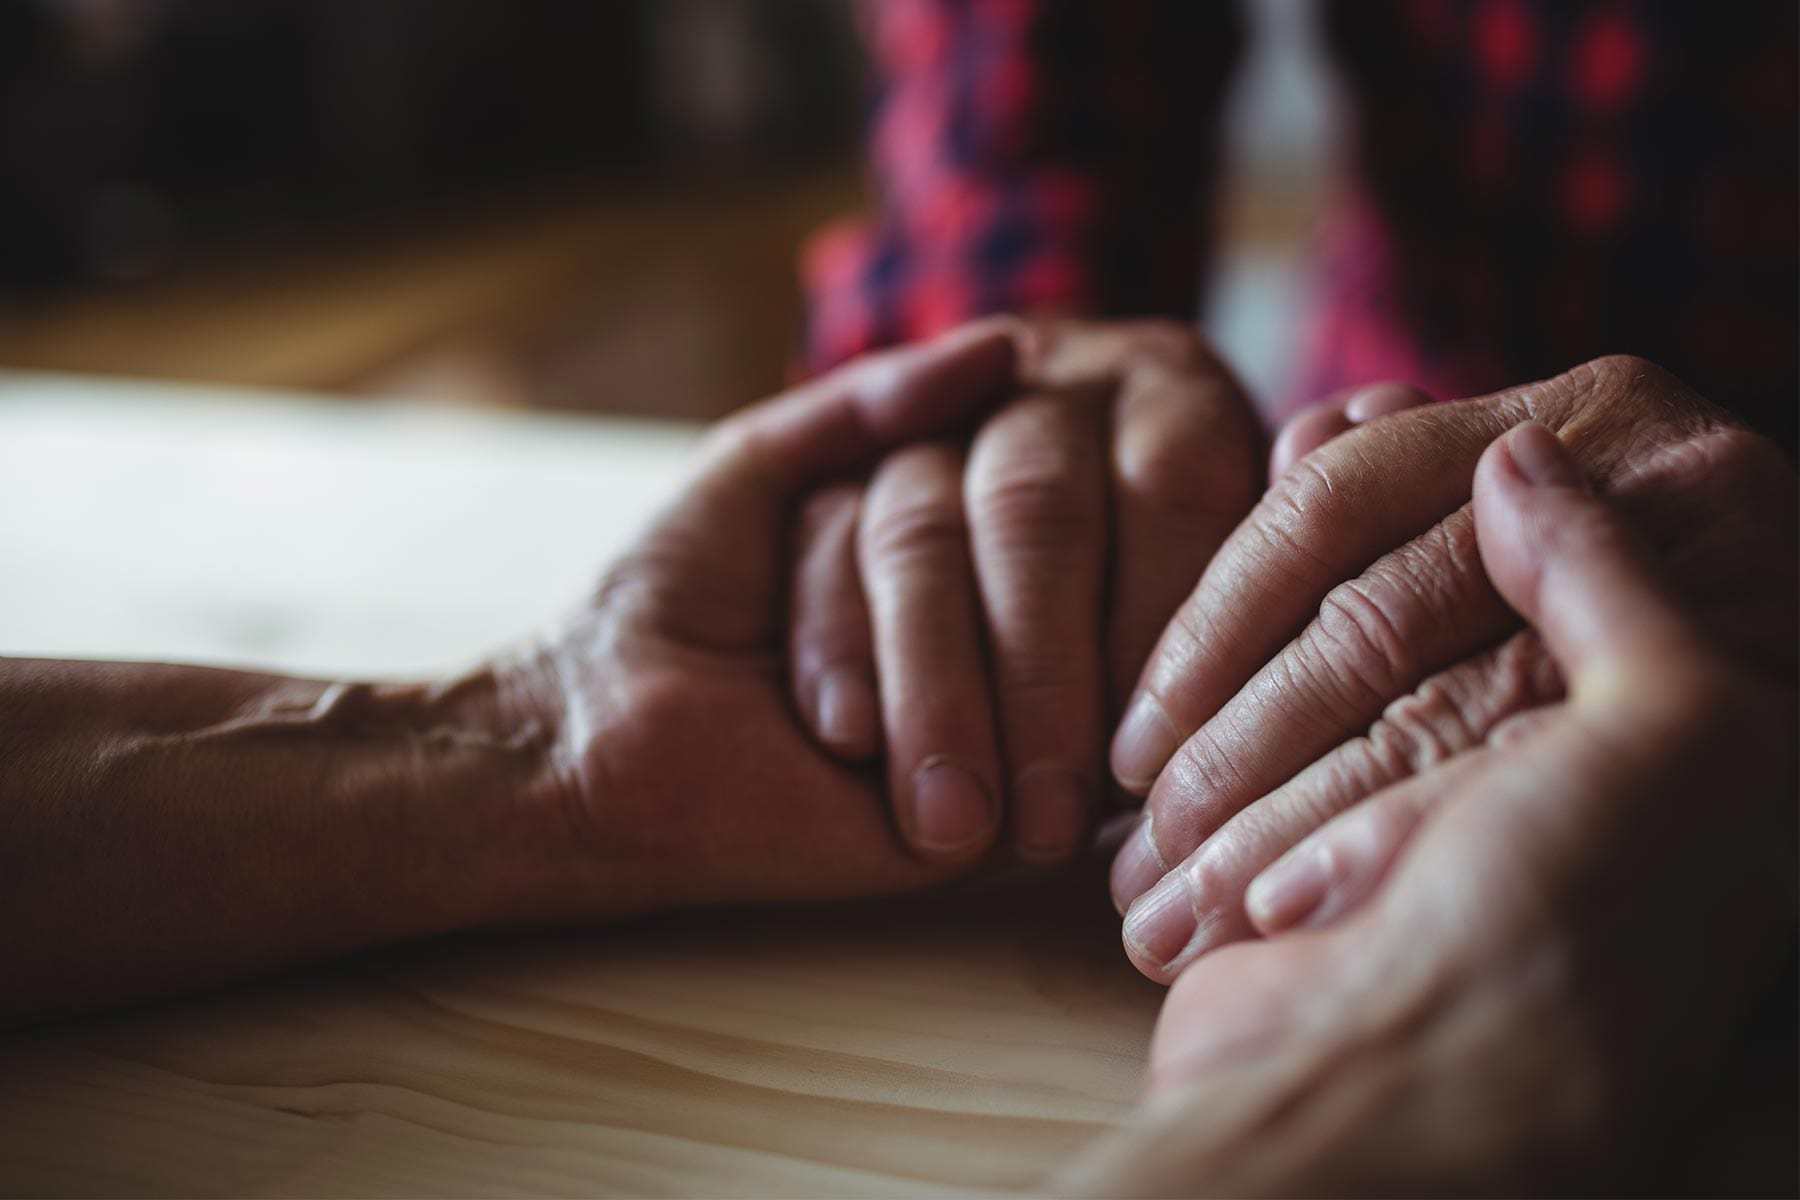 Relaxing the restrictions: how do care providers support families through grief and loss?